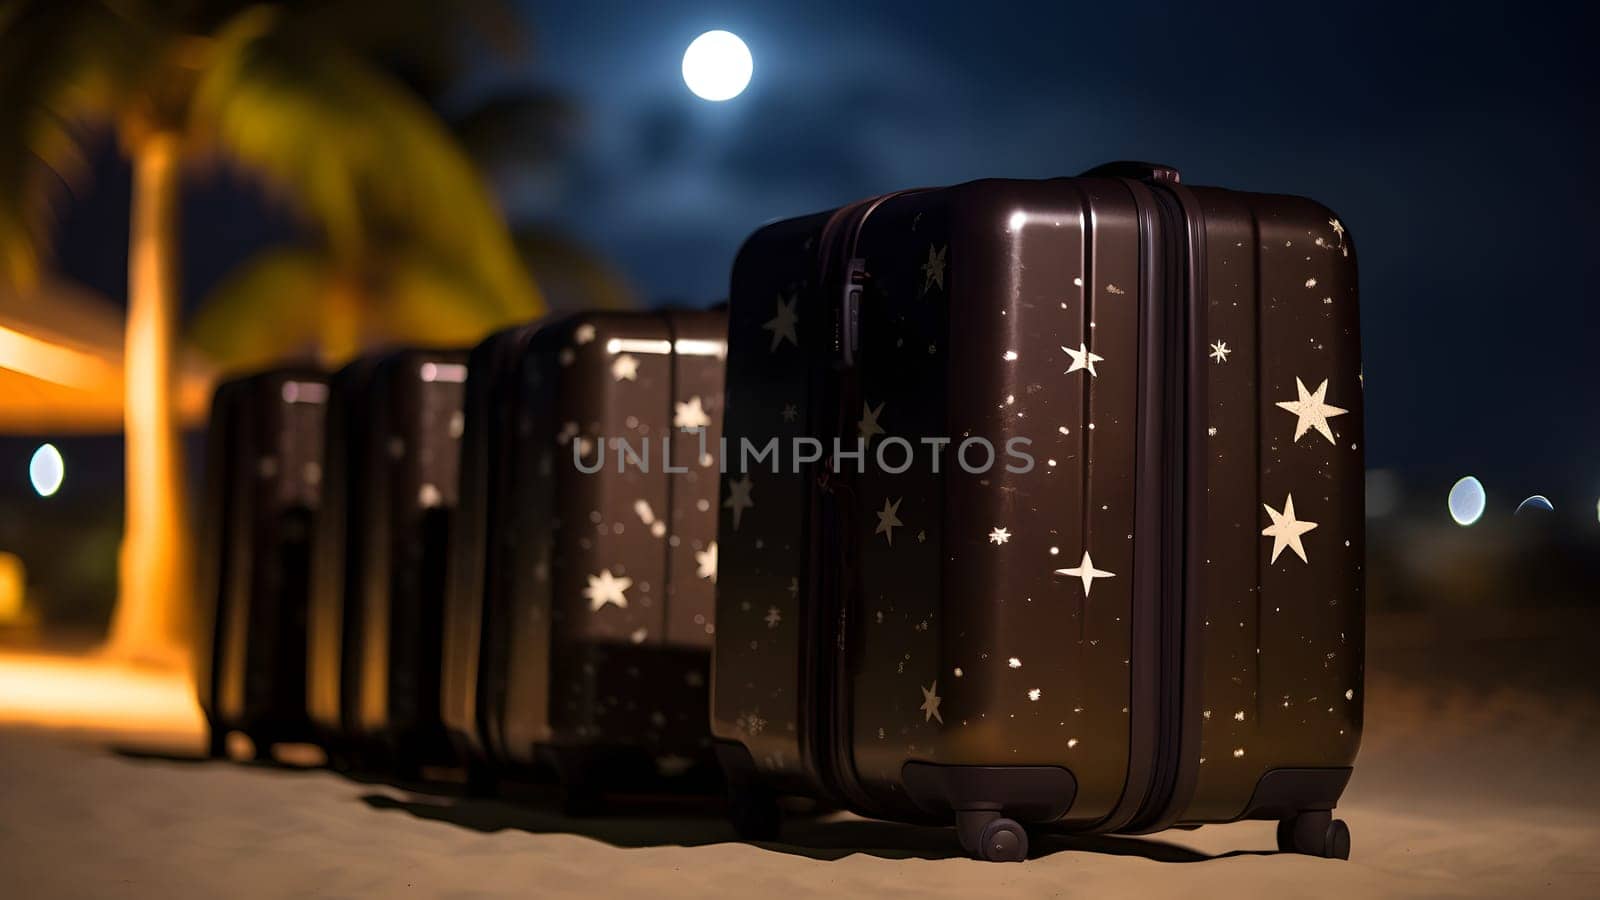 Few modern suitcases on tropical resort beach at night. Neural network generated in May 2023. Not based on any actual person, scene or pattern.